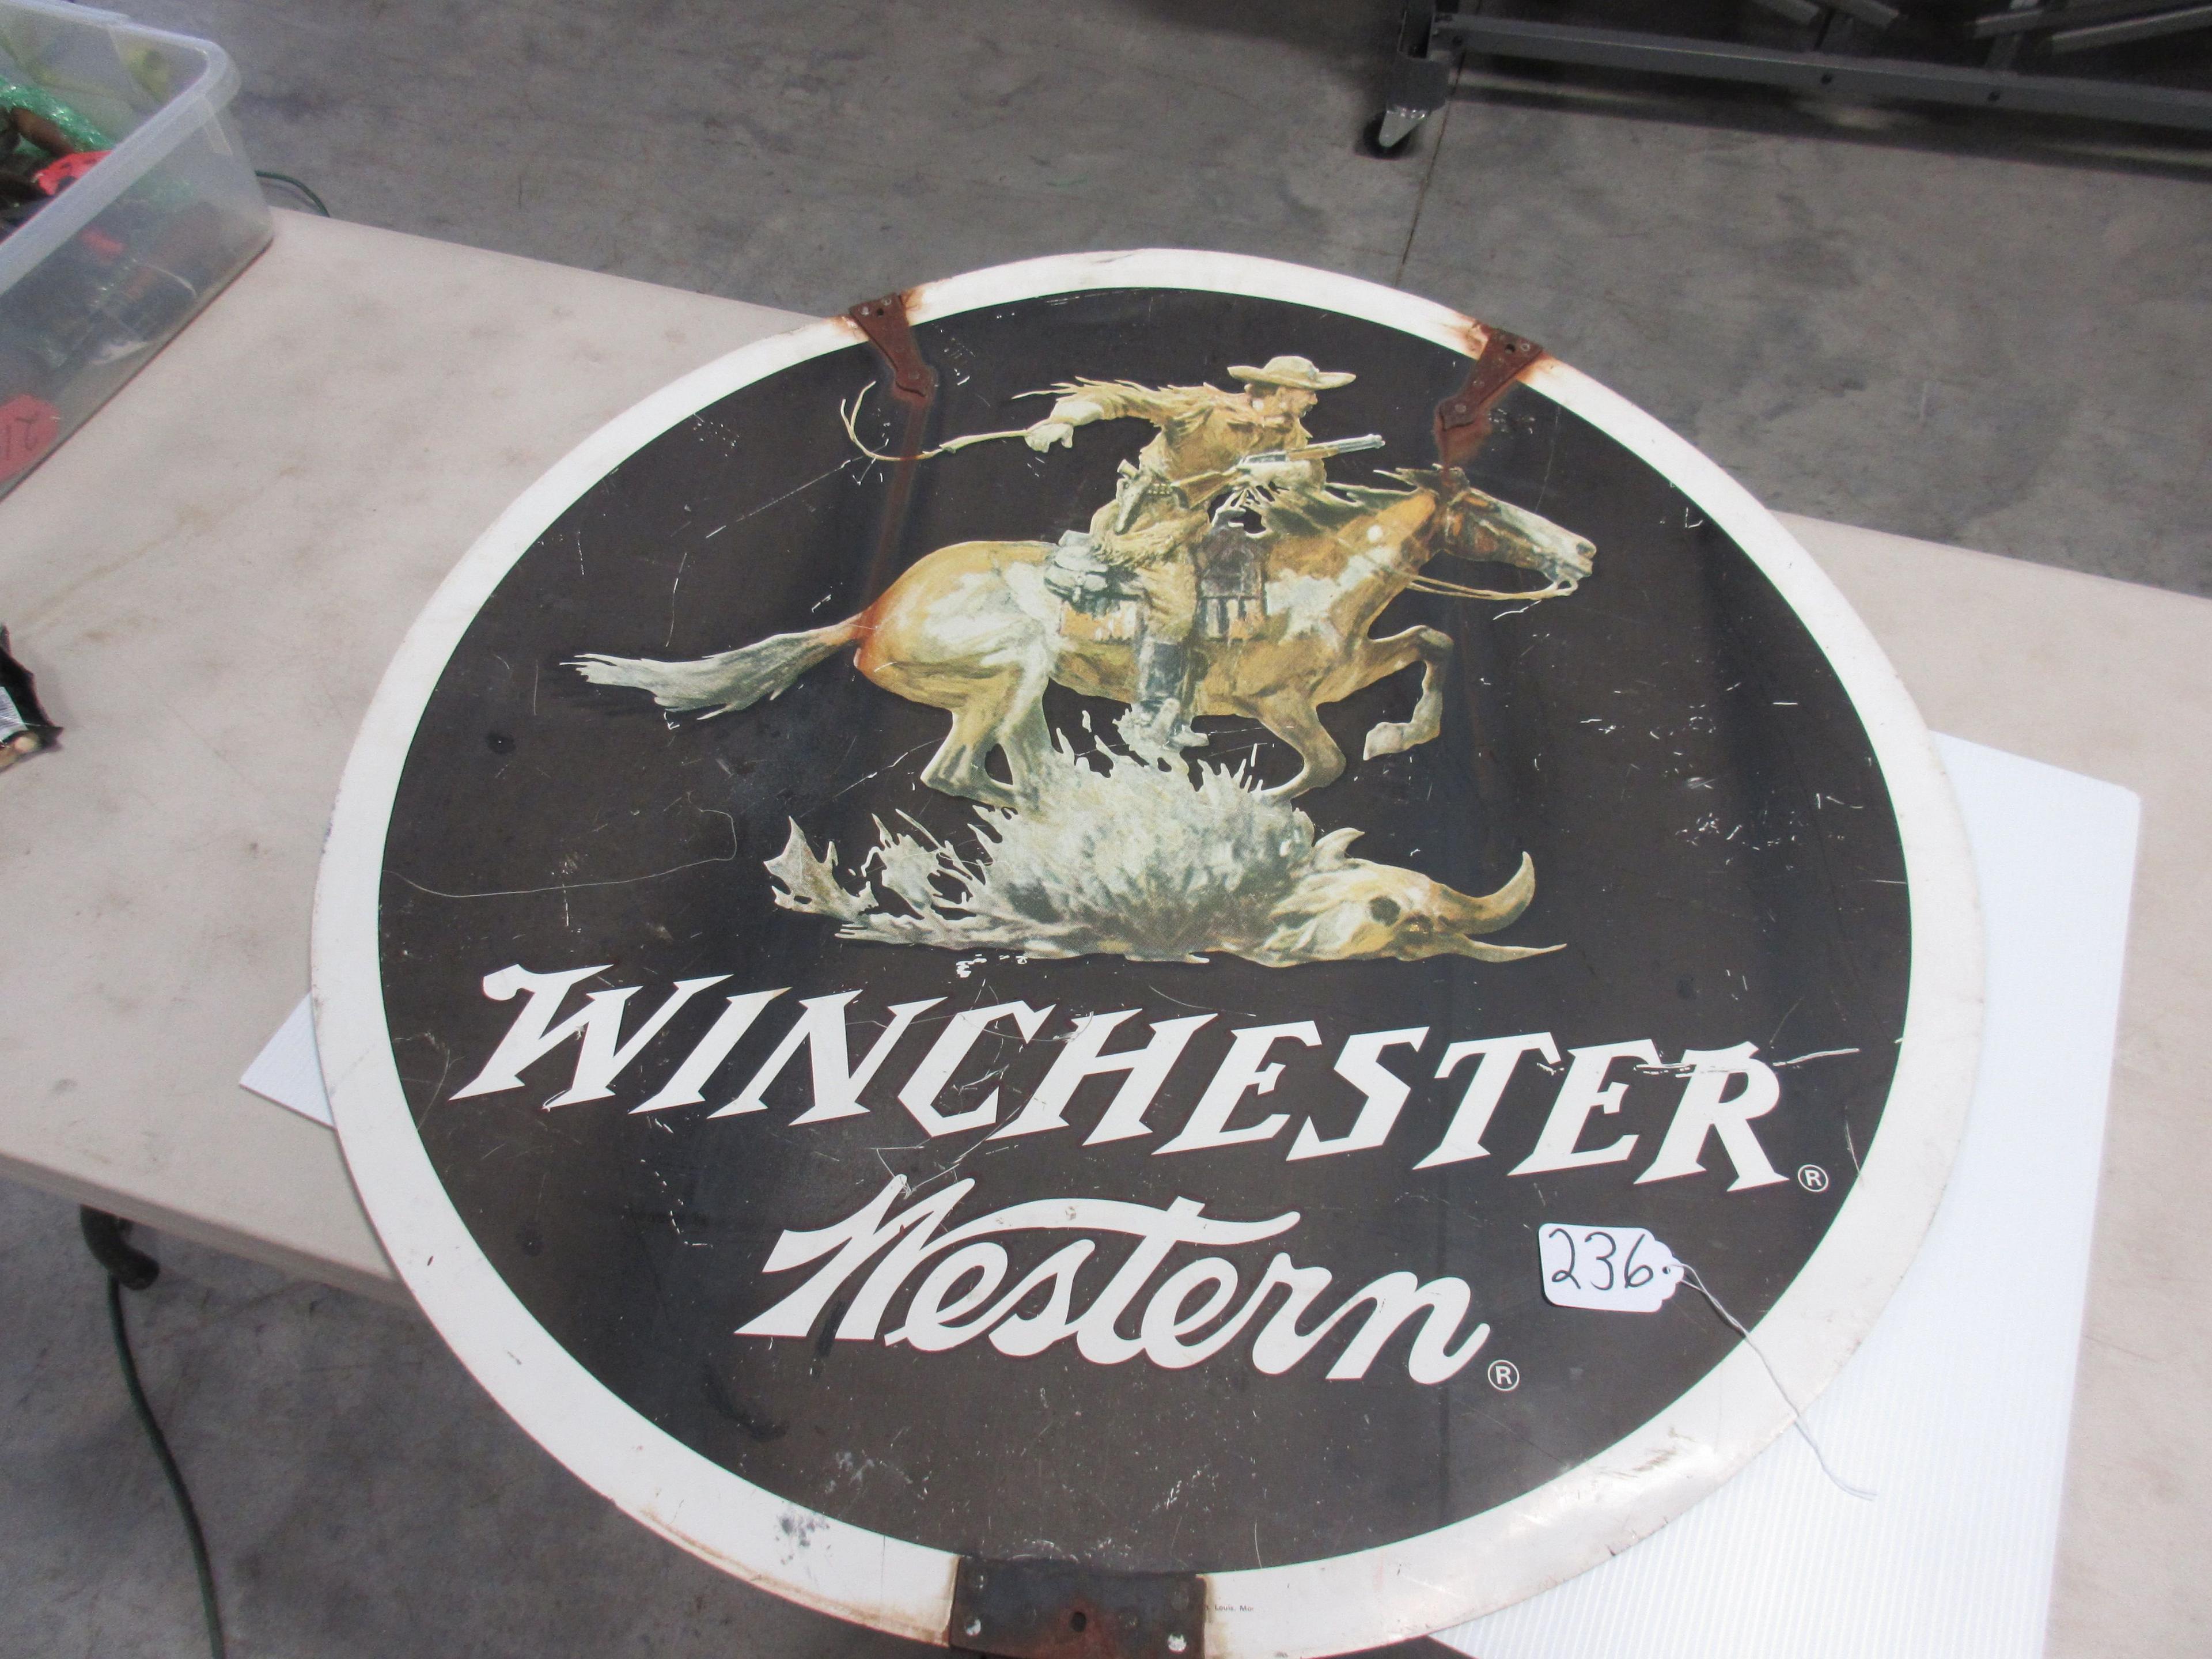 WINCHESTER TIN ADV. SIGN DOUBLE SIDED 38'' ROUND GREAT PIECE